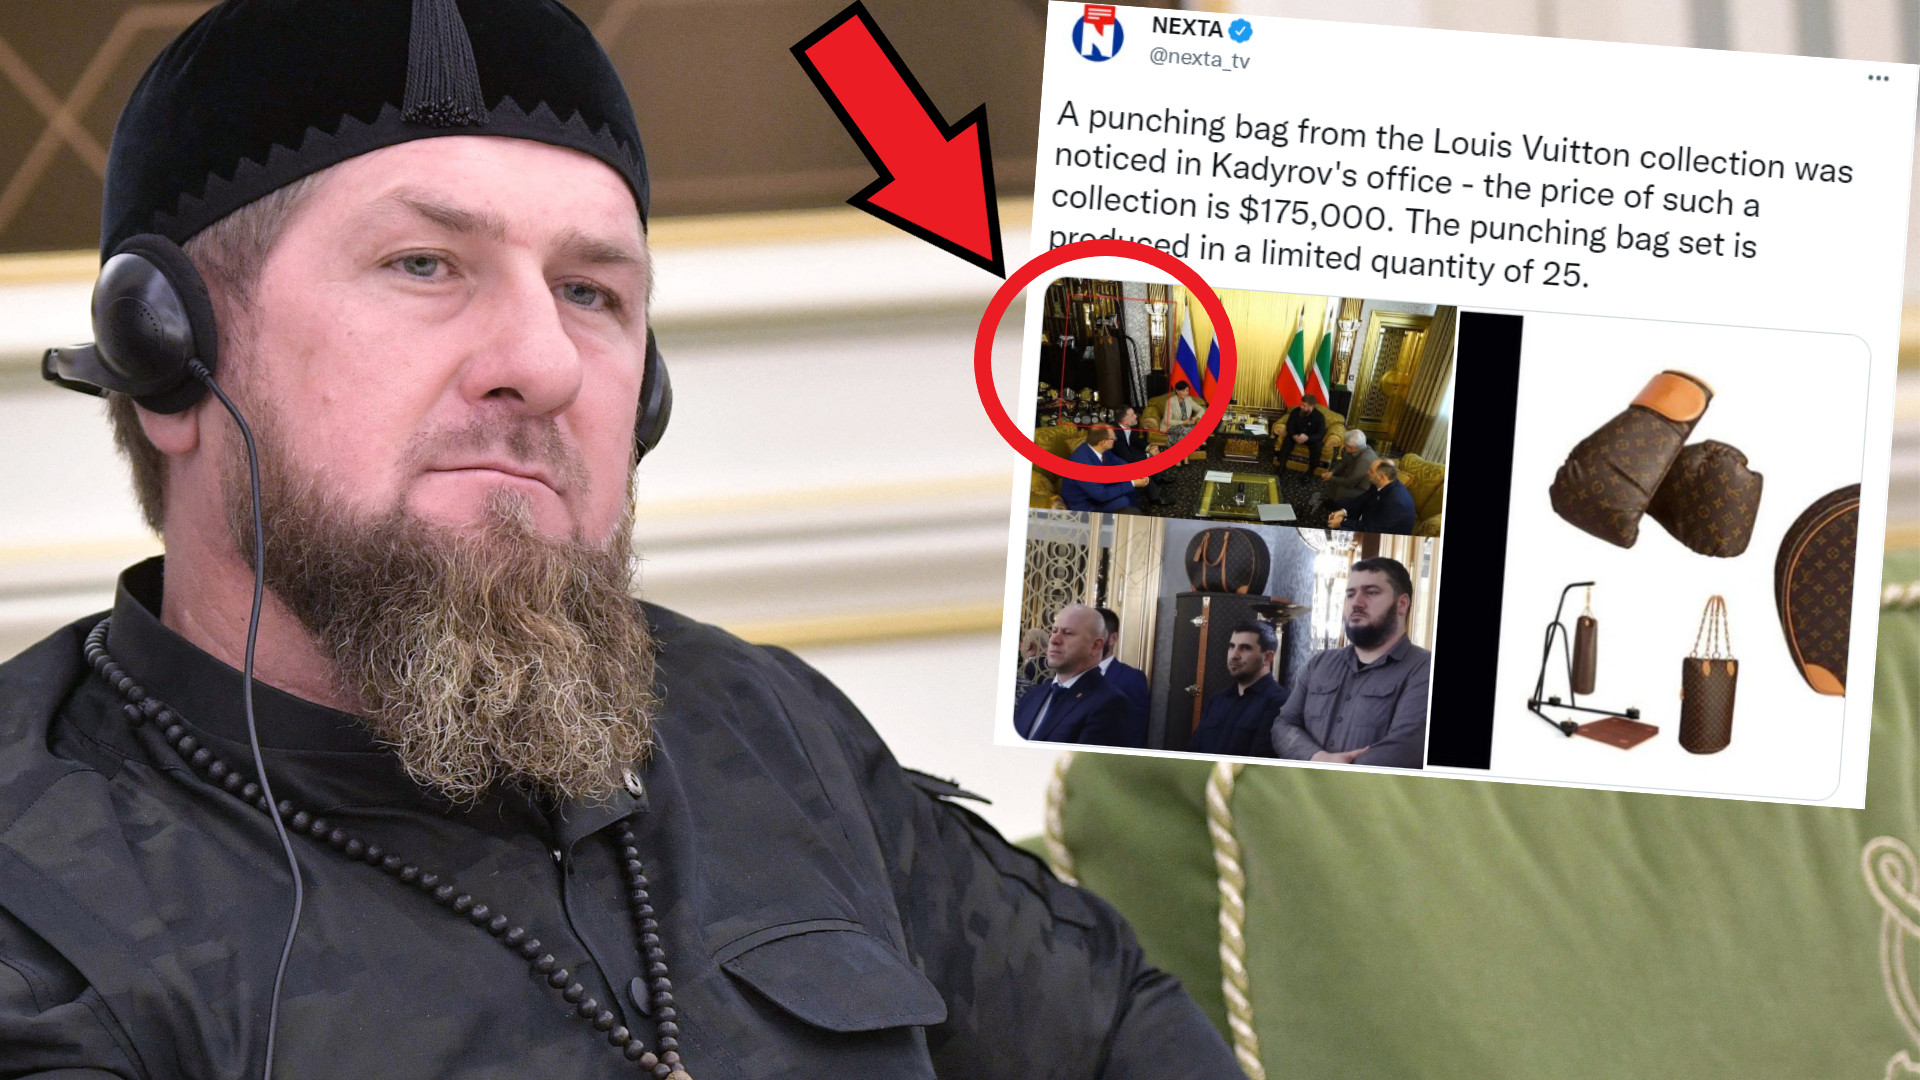 NEXTA on X: A punching bag from the Louis Vuitton collection was noticed  in Kadyrov's office - the price of such a collection is $175,000. The  punching bag set is produced in